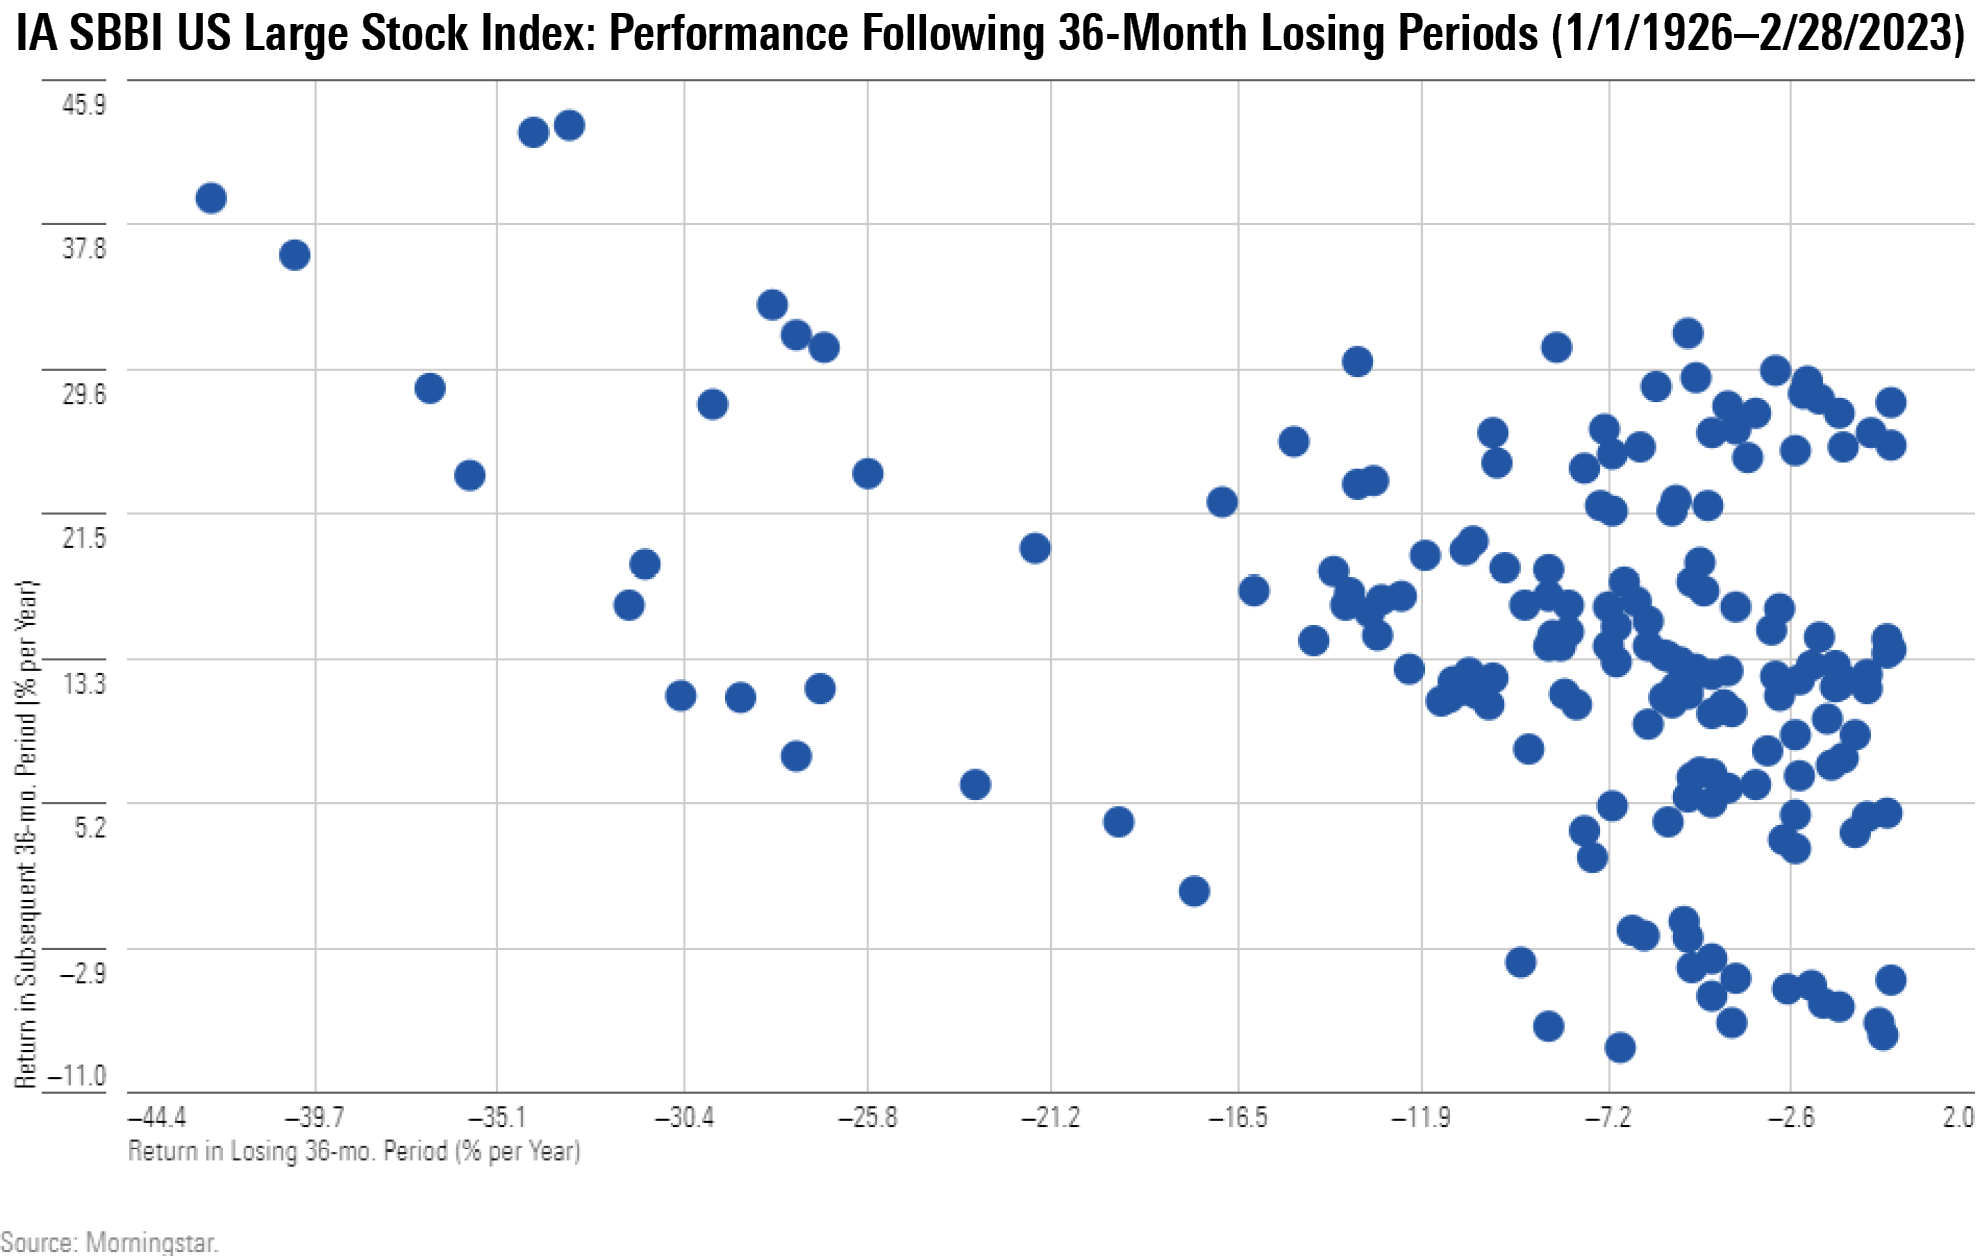 Scatterplot chart showing IA SBBI US Large Stock Index: Performance Following 36-month Losing Periods (1/1/1926 - 2/28/2023)